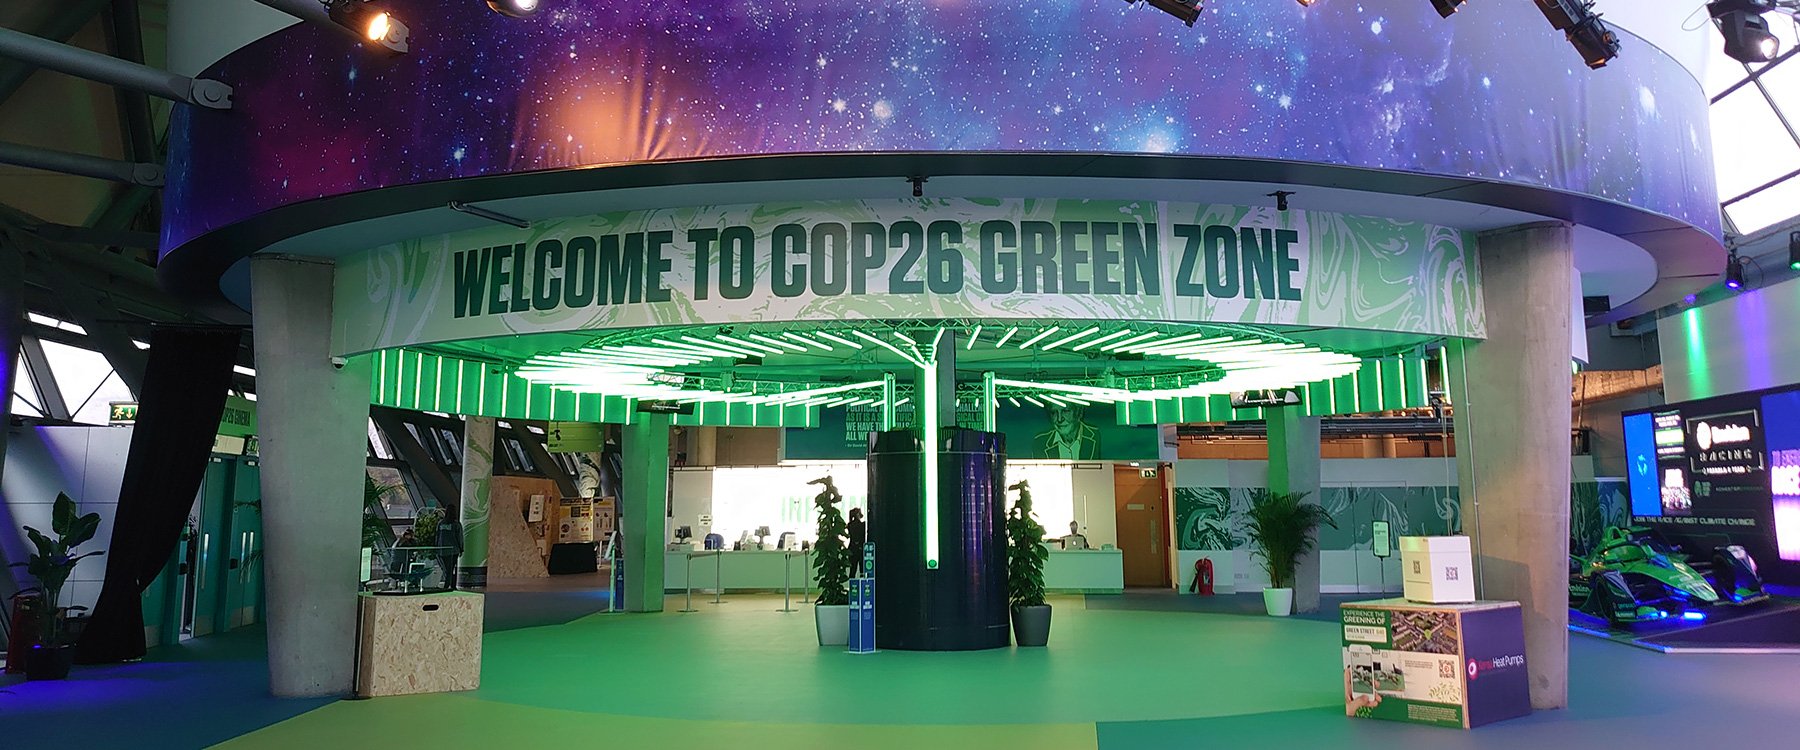 A sign around the underside of the Planetarium reads 'Welcome to the COP26 Green Zone'.